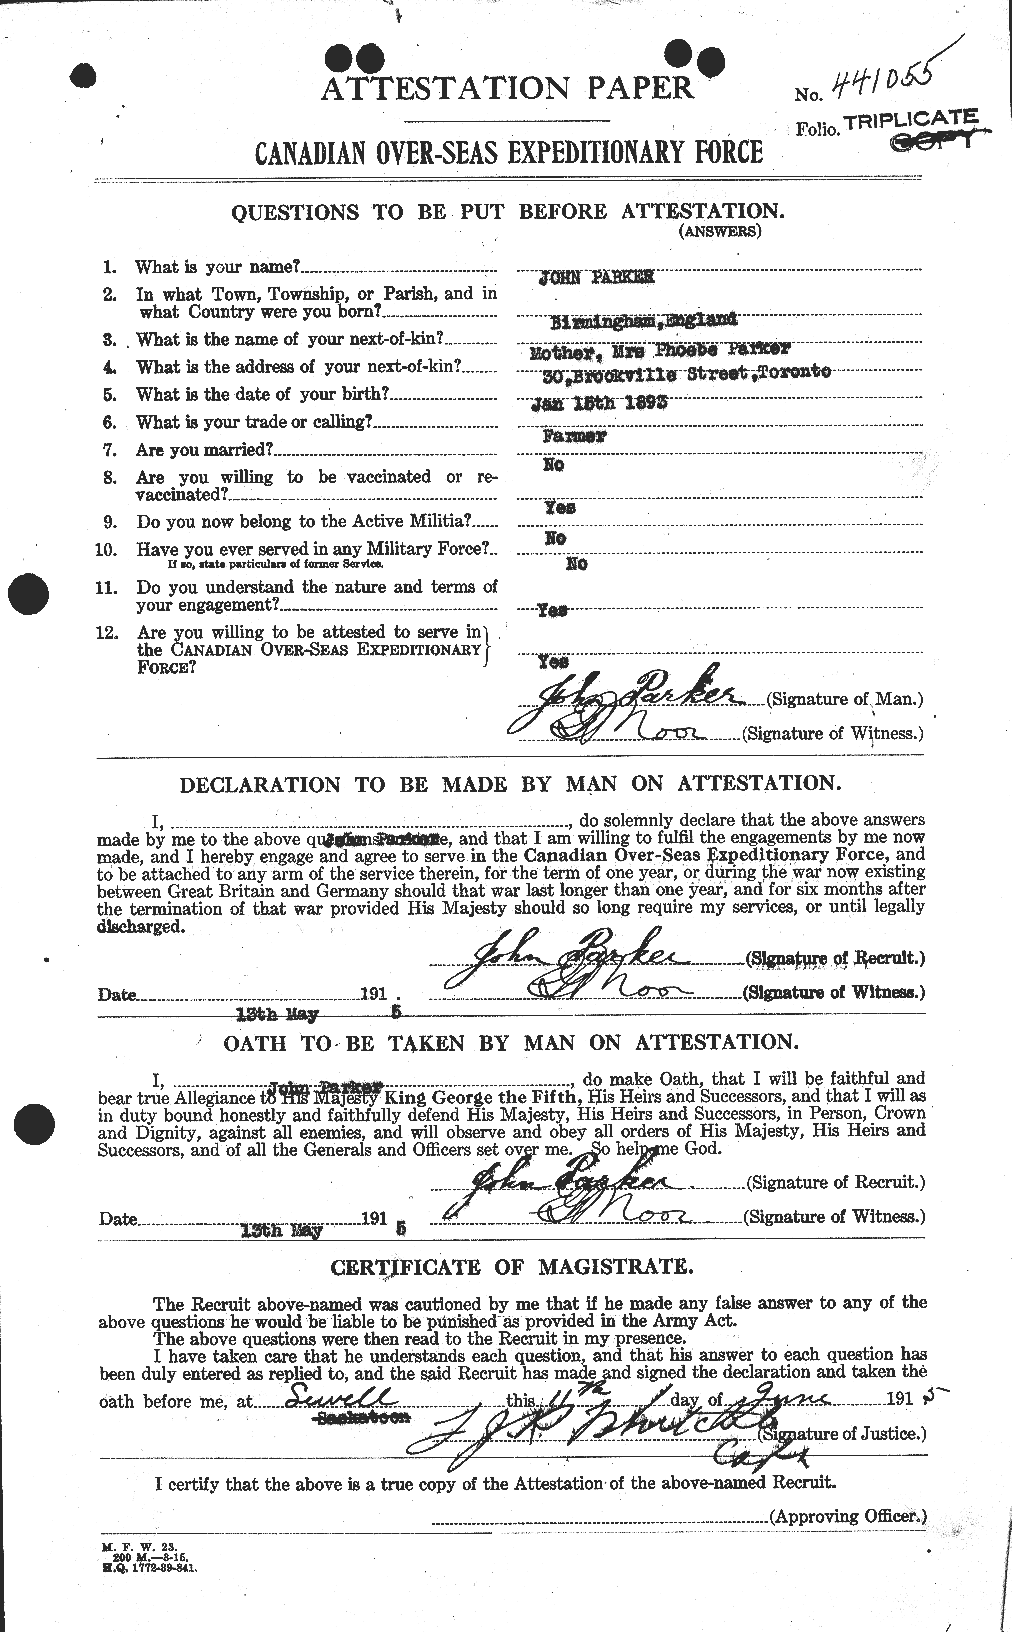 Personnel Records of the First World War - CEF 565453a